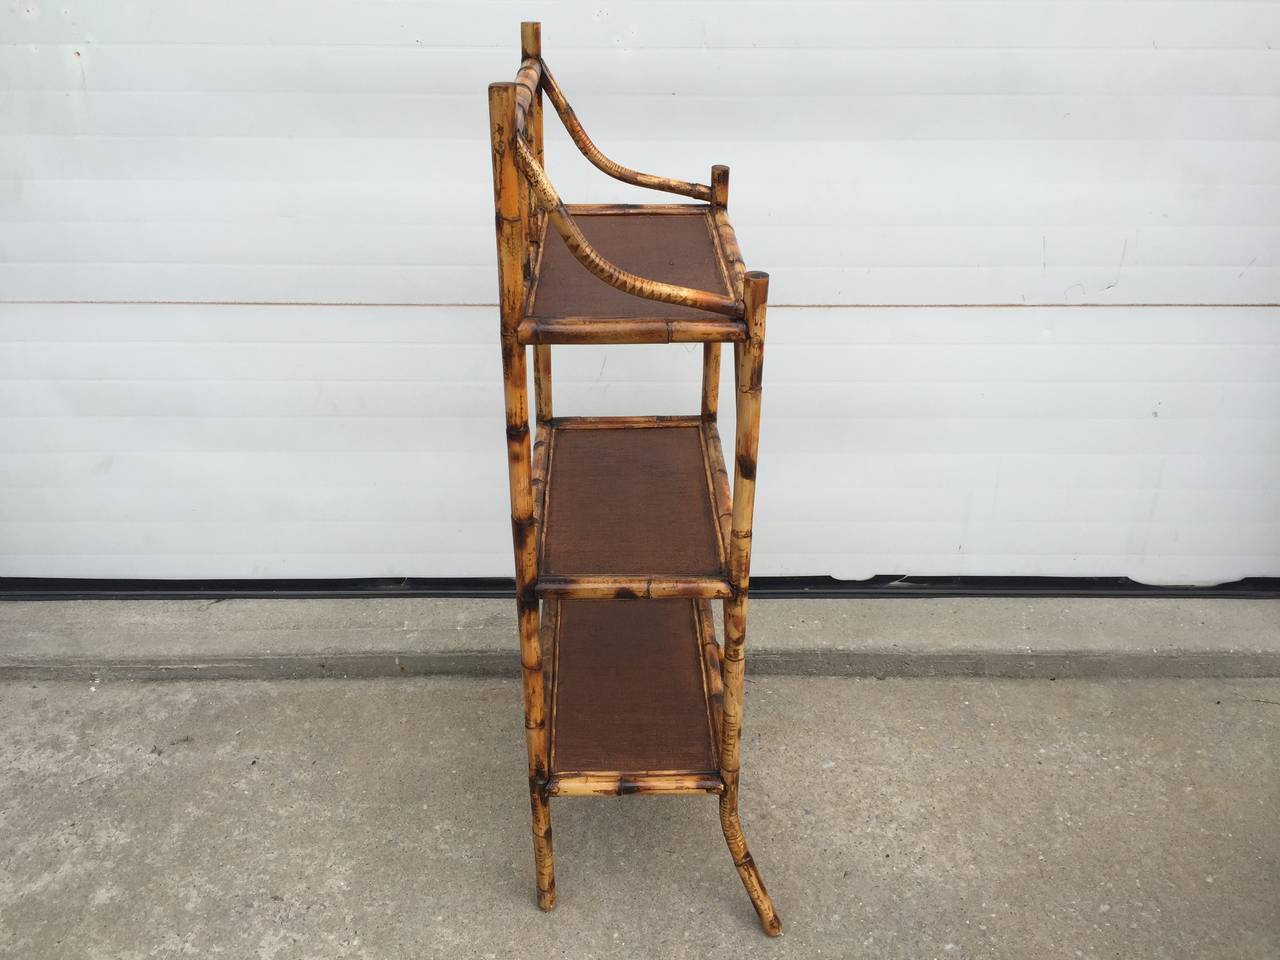 This scorched bamboo Etagere with bent legs has three different levels of shelving.  The shelves are lined with espresso painted Rattan and are ready to be filled with decorative goods.  Made in England and made in the 1930's.